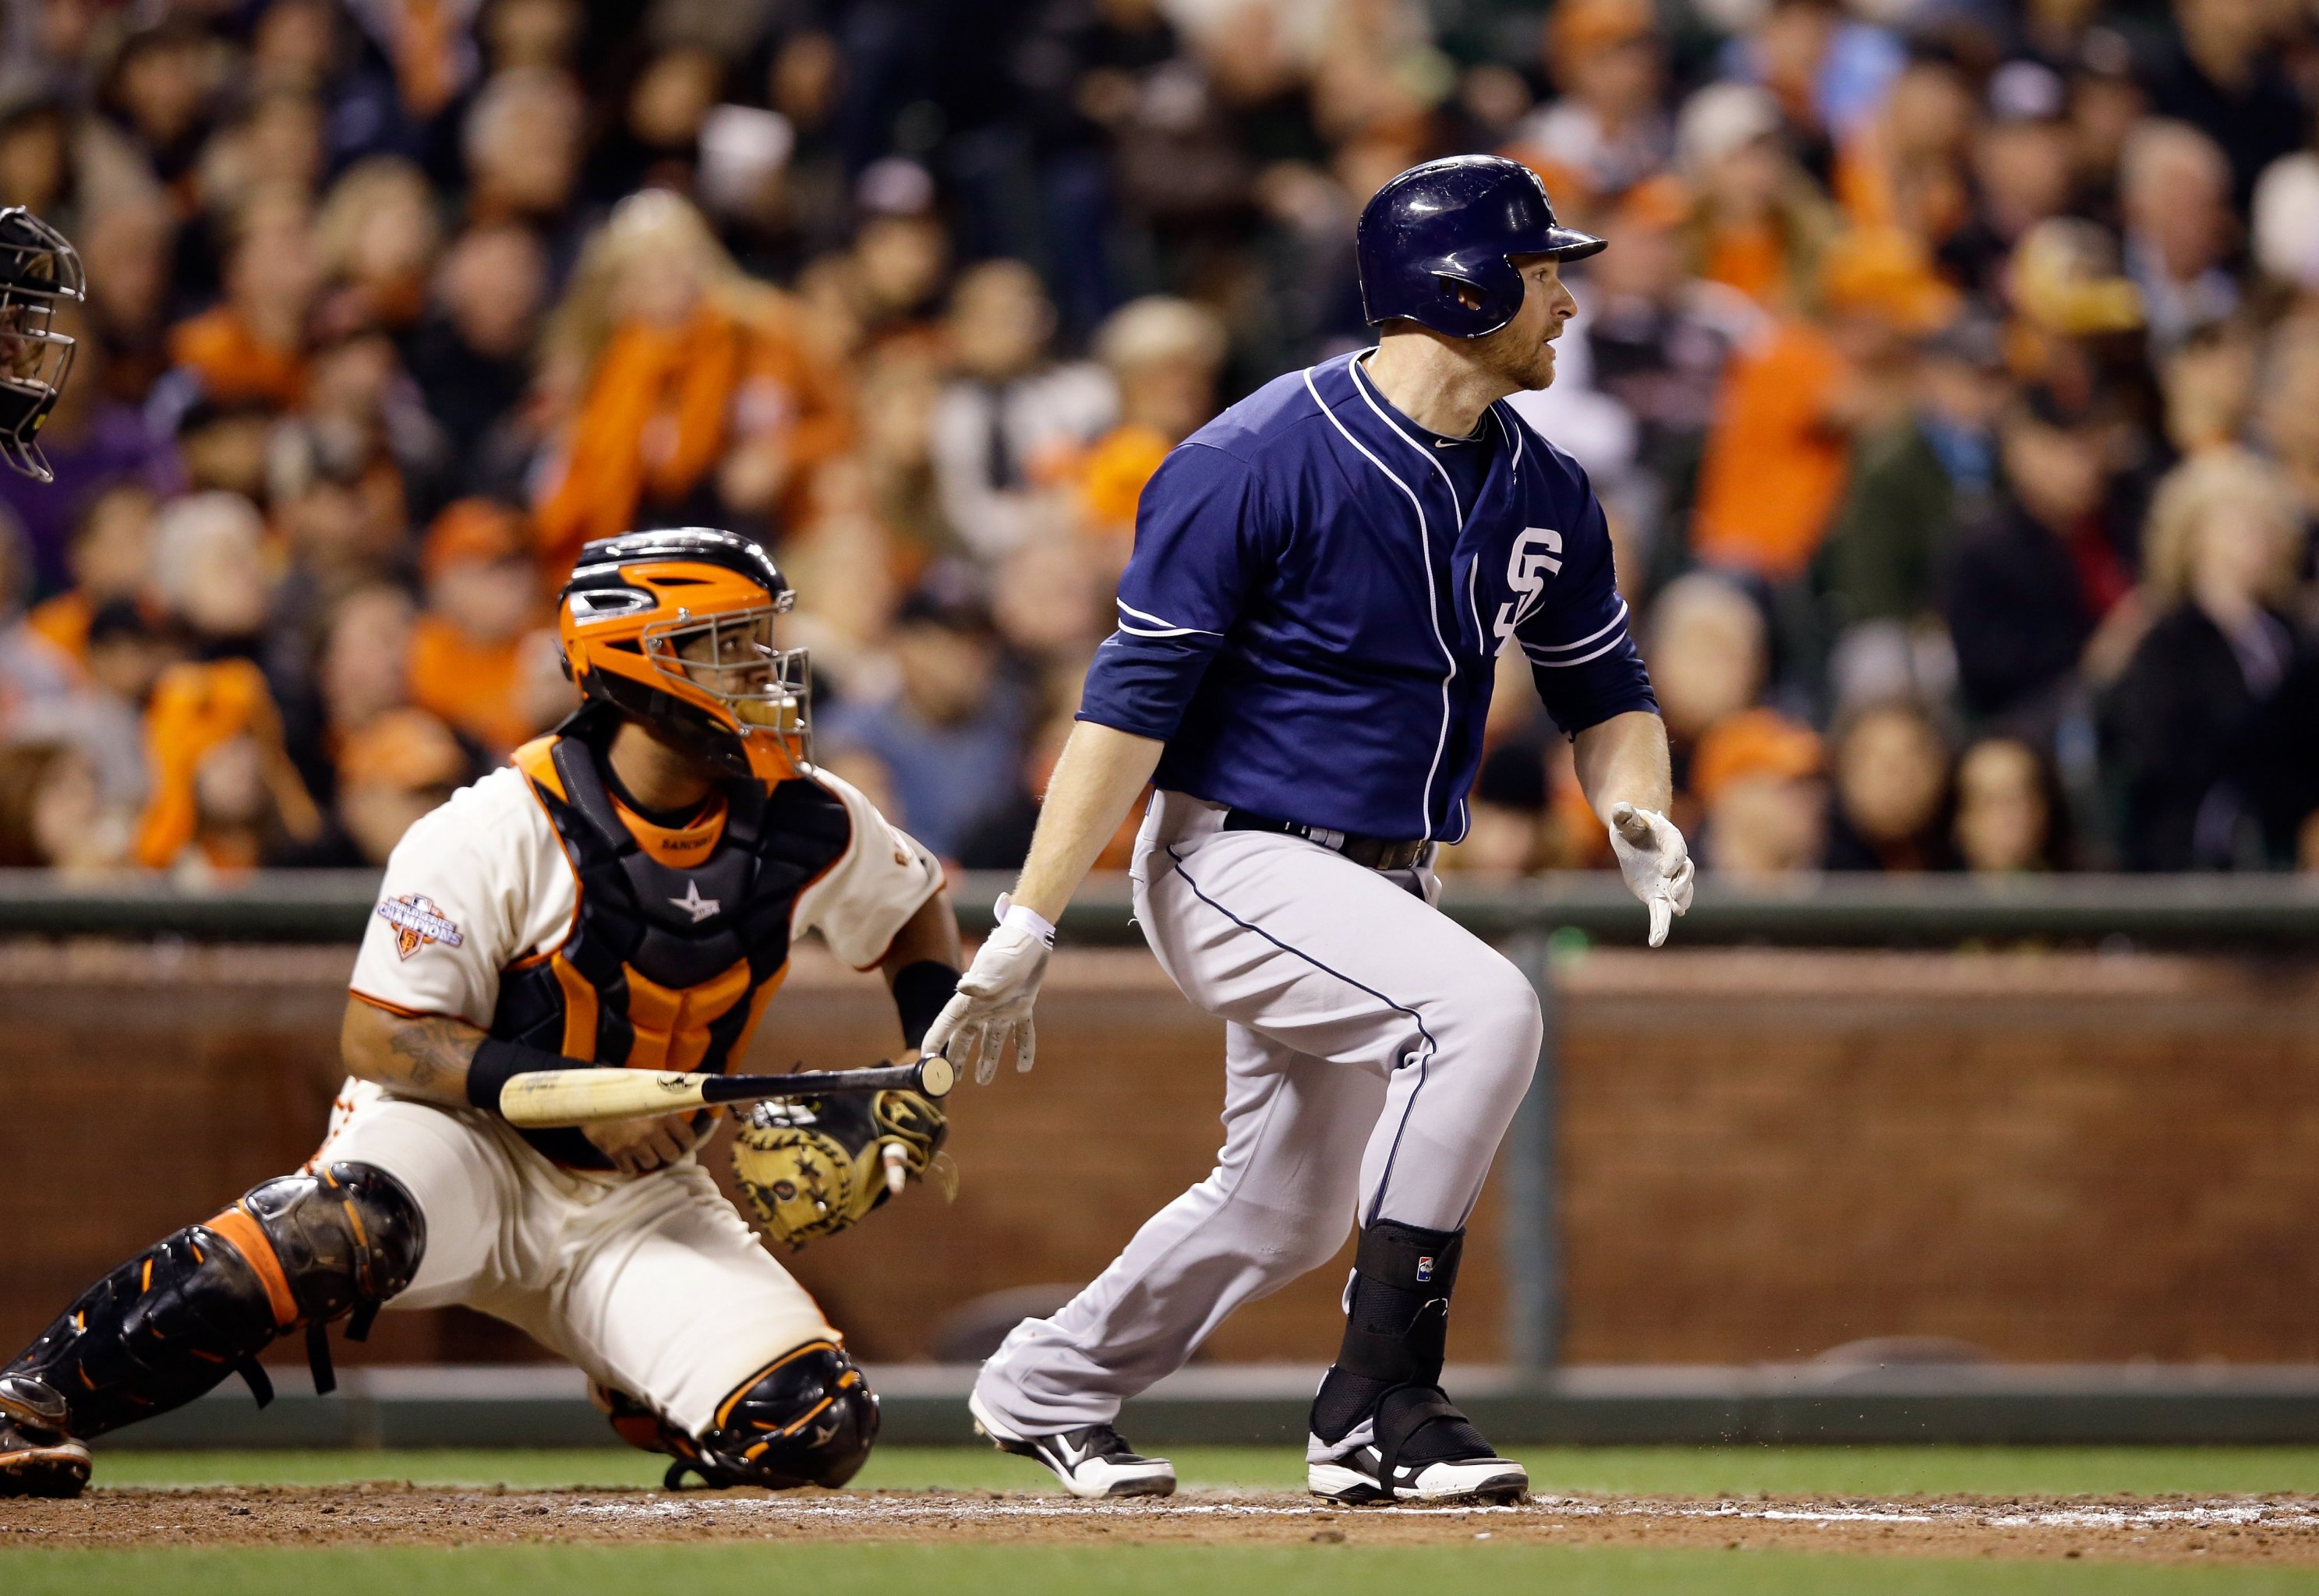 Muted reaction to Tampa Bay Rays star Evan Longoria's stolen AK-47